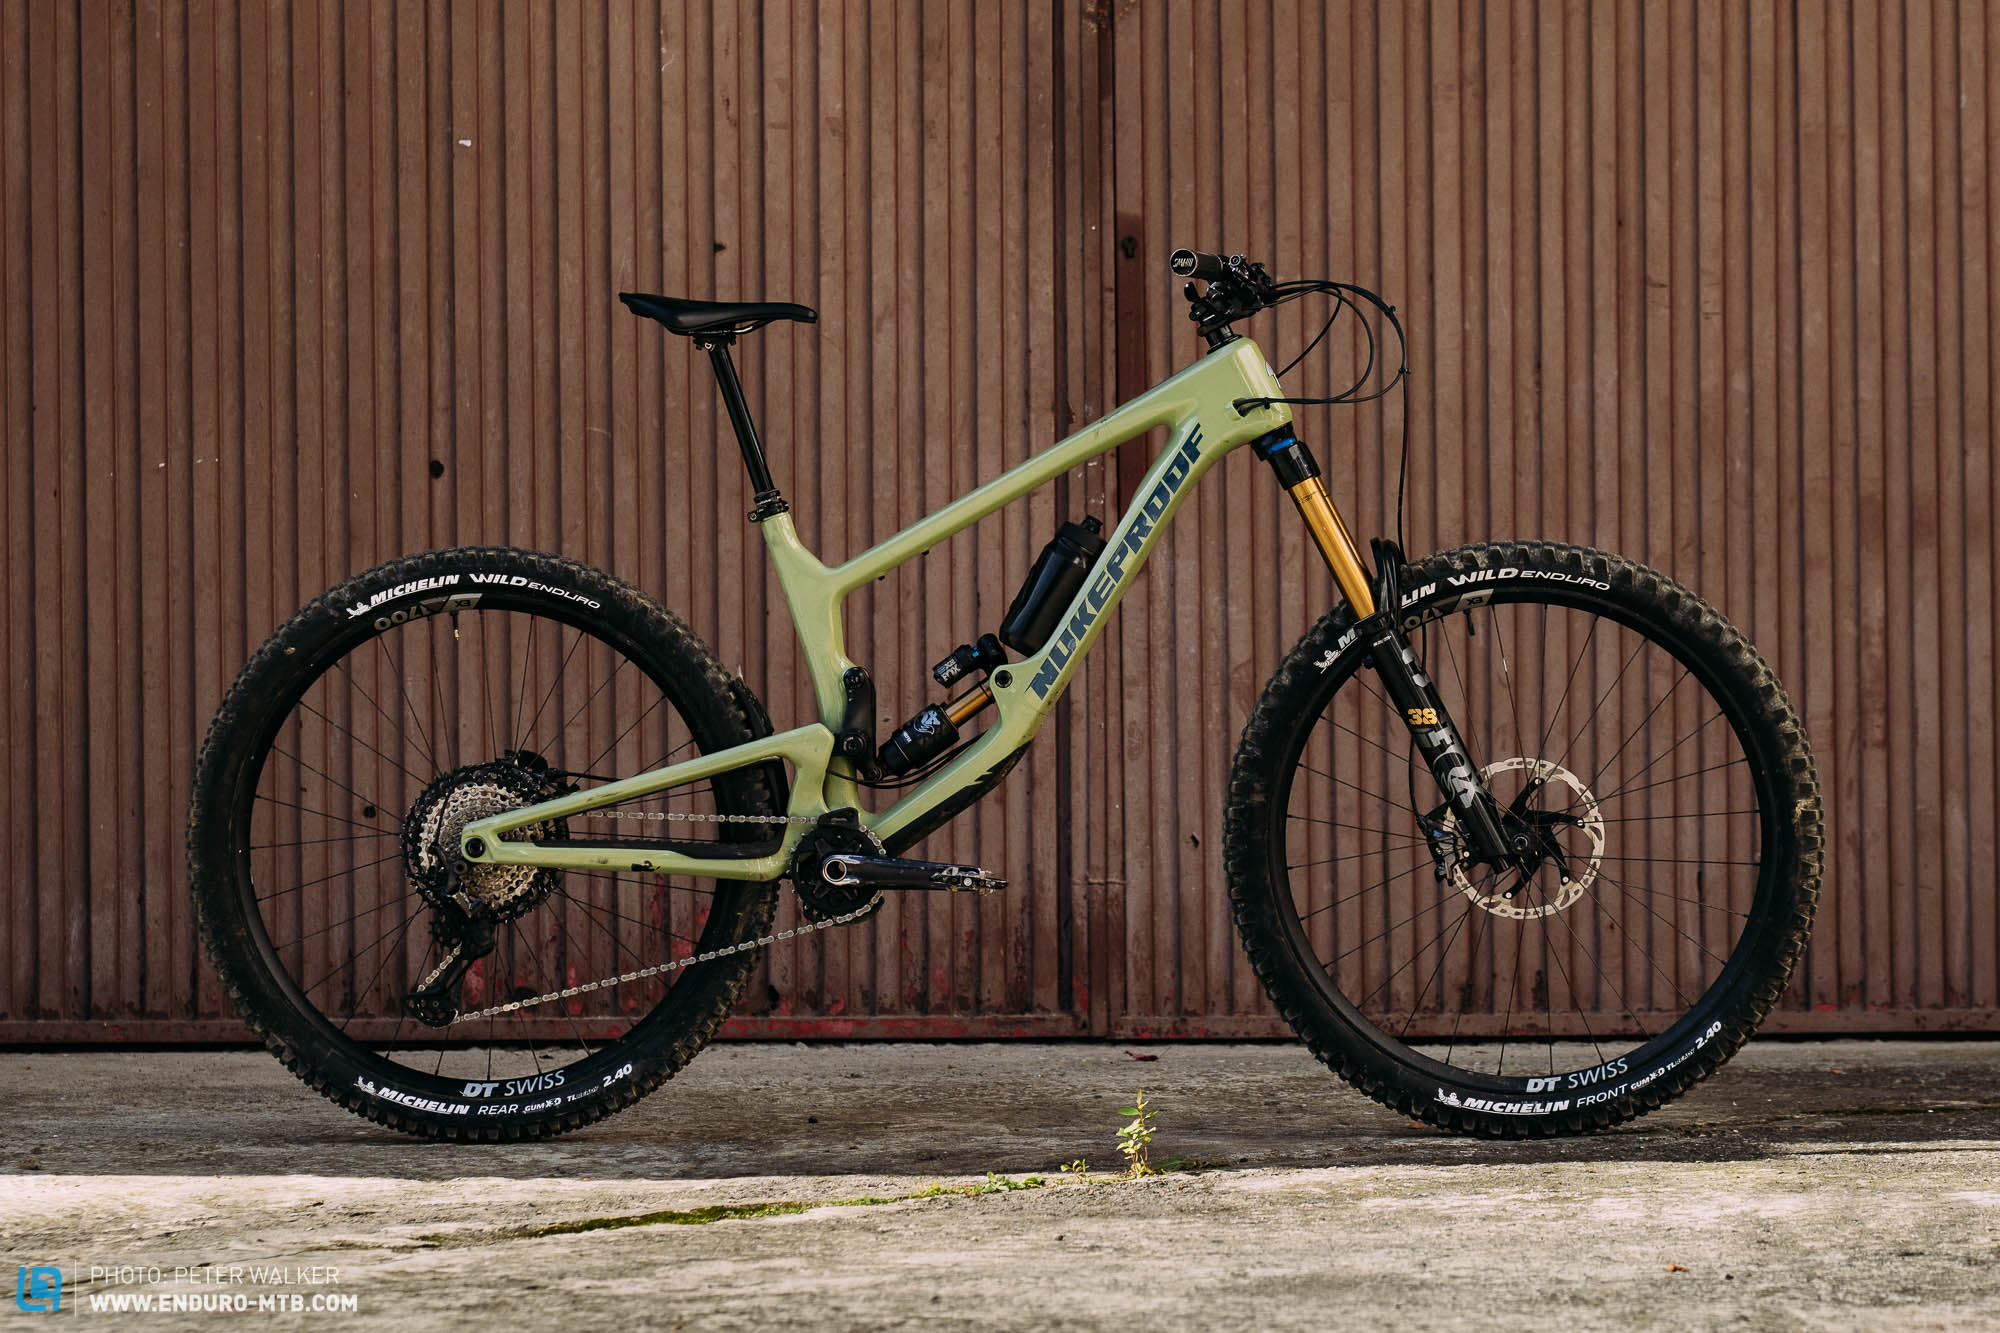 Nukeproof Giga 290 Carbon Factory 2021 – In our big enduro bike